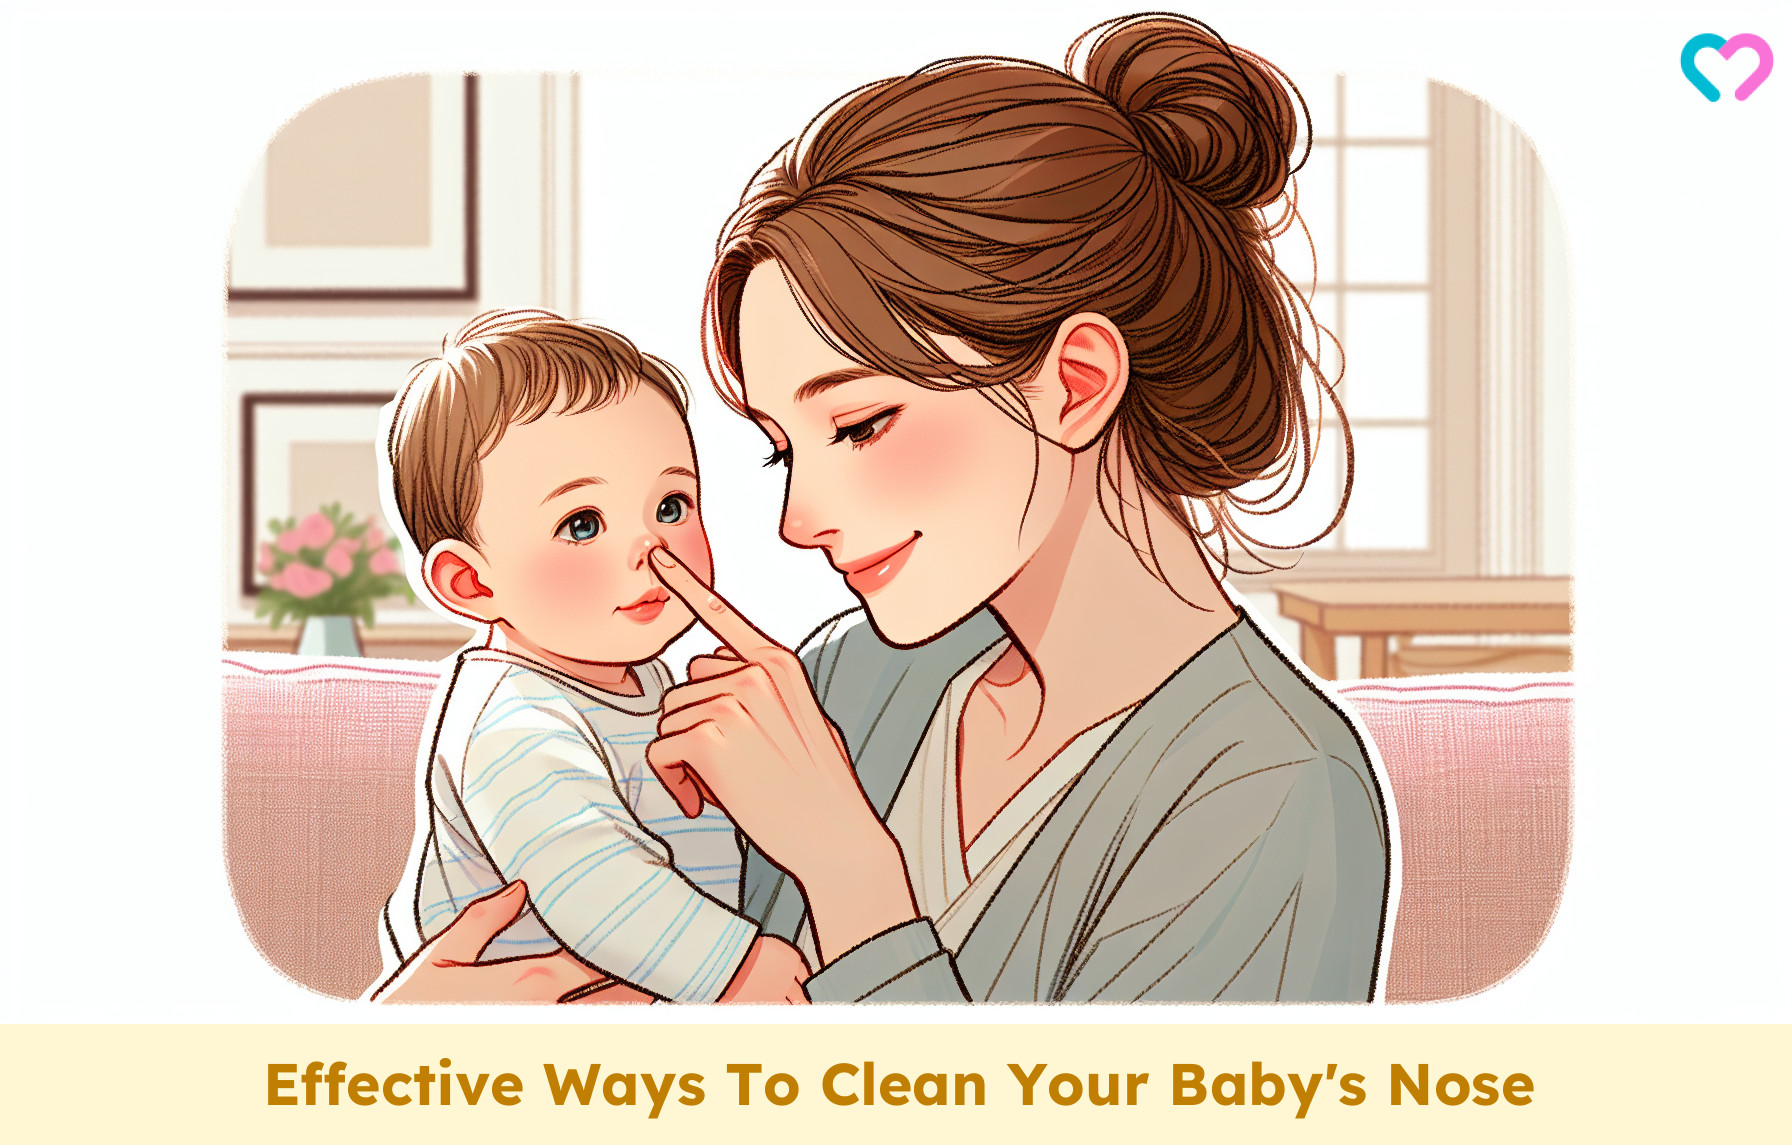 Ways To Clean Your Baby's Nose_illustration